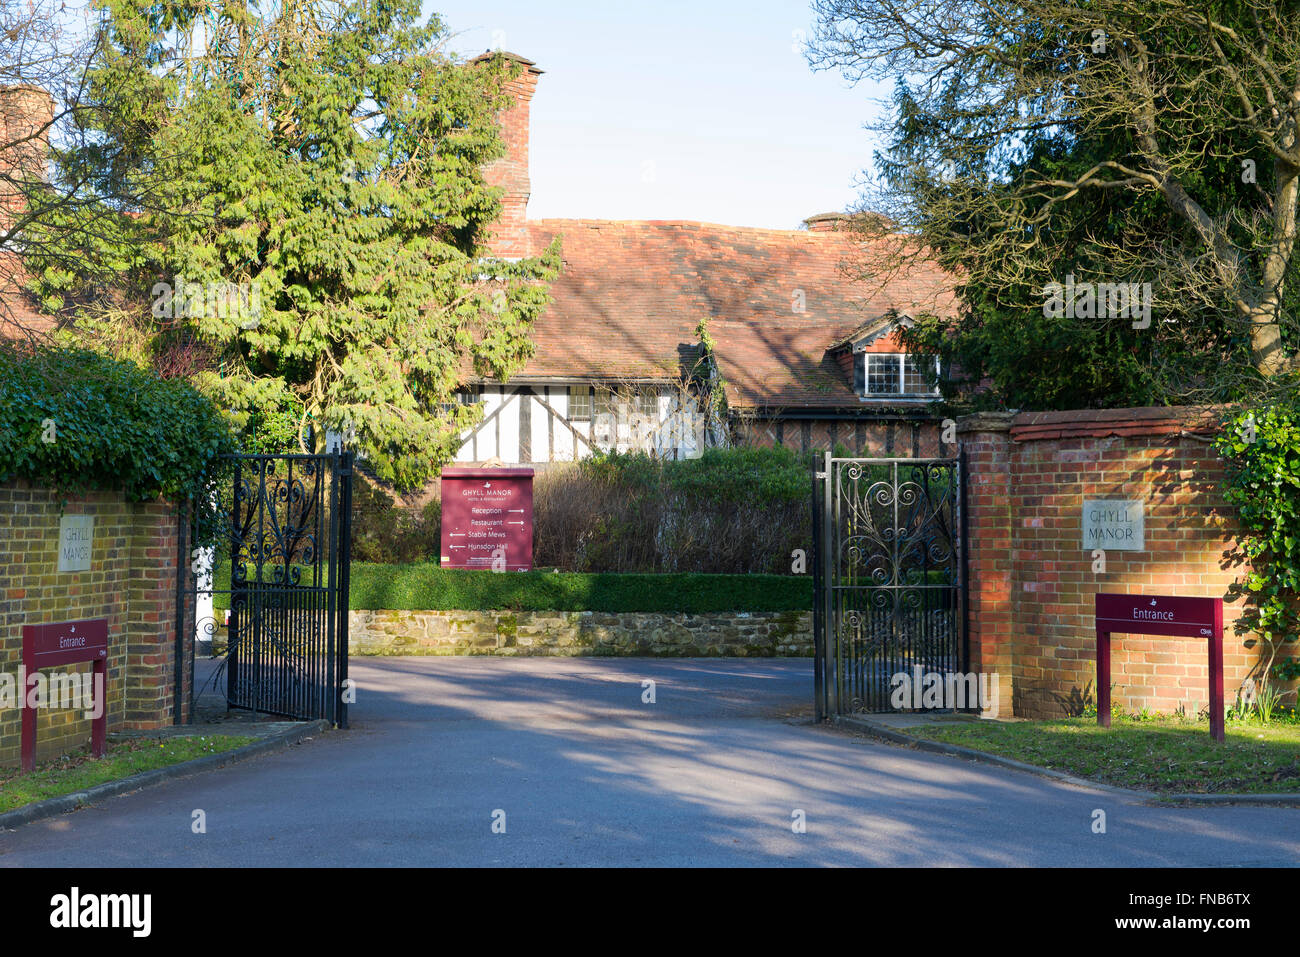 The entrance to Ghyll Manor Hotel and restaurant in the village of Rusper, West Sussex, UK Stock Photo